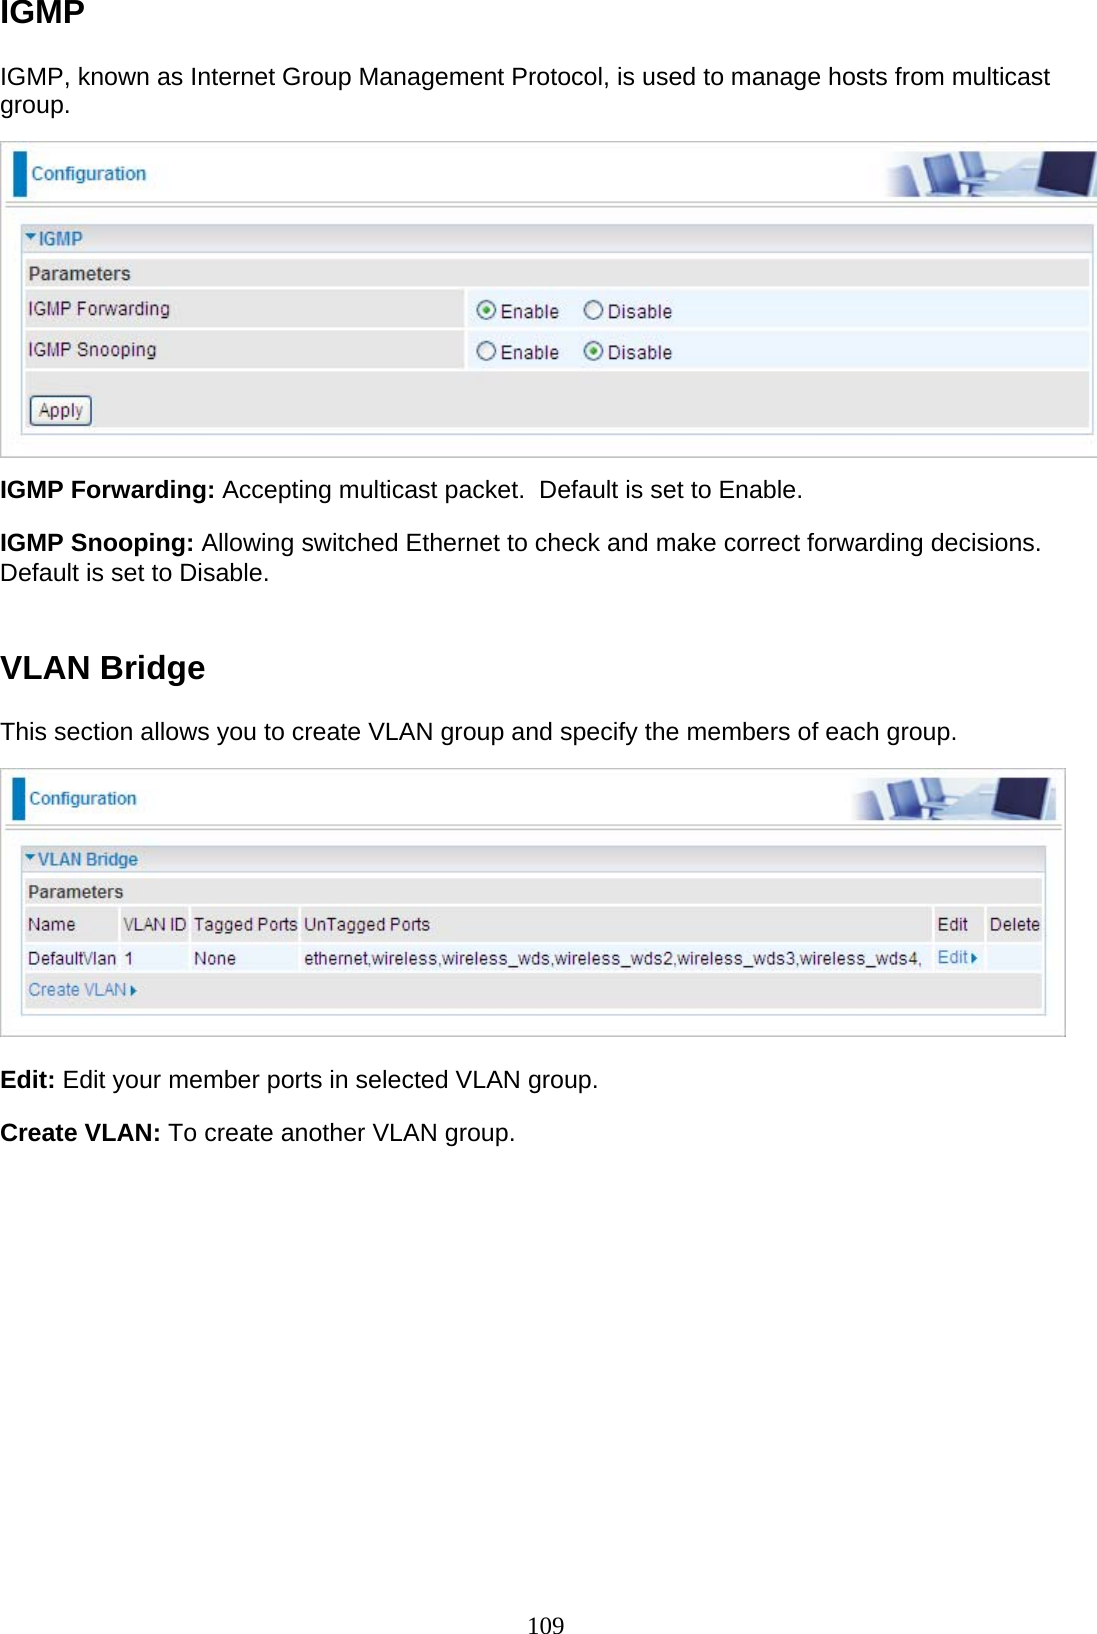 109 IGMP  IGMP, known as Internet Group Management Protocol, is used to manage hosts from multicast group.    IGMP Forwarding: Accepting multicast packet.  Default is set to Enable.  IGMP Snooping: Allowing switched Ethernet to check and make correct forwarding decisions. Default is set to Disable.    VLAN Bridge  This section allows you to create VLAN group and specify the members of each group.    Edit: Edit your member ports in selected VLAN group.  Create VLAN: To create another VLAN group.     